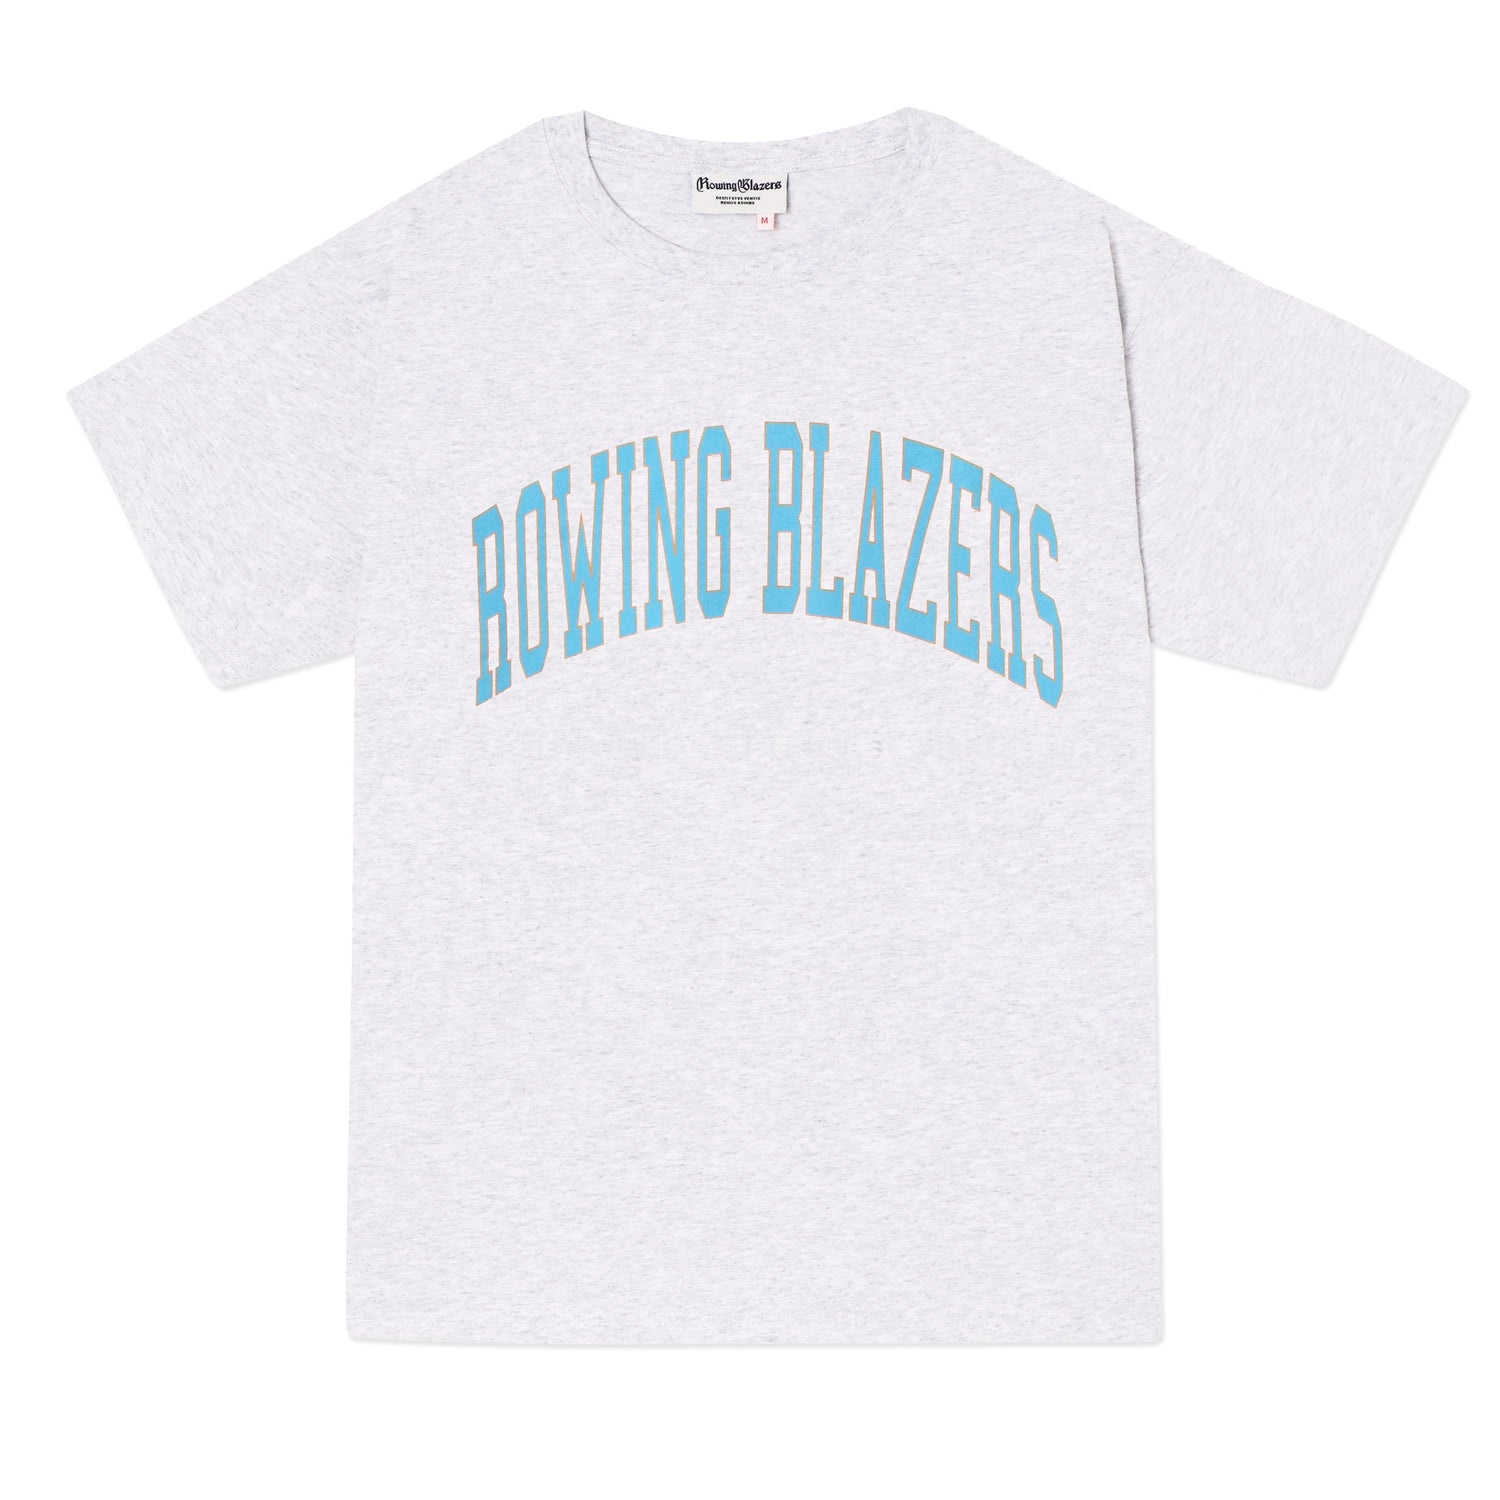 Classic light heather gray collegiate tee with "Rowing Blazers" across the front in blue.